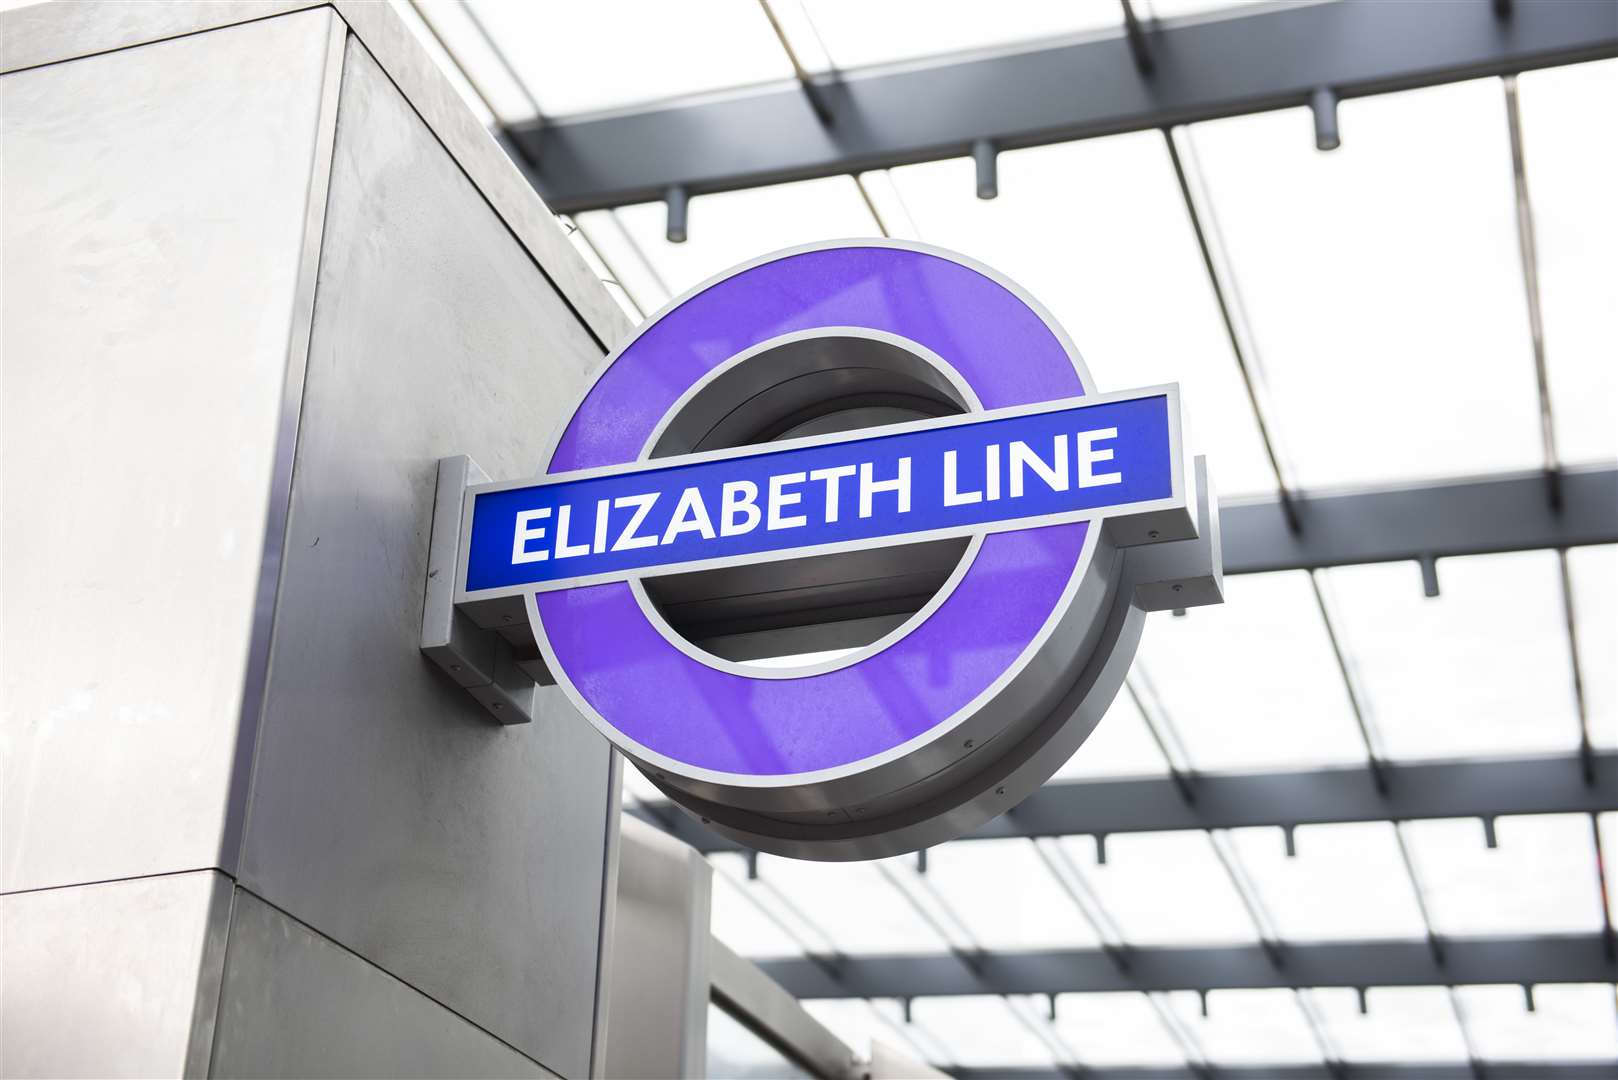 Marked by the colour purple the Elizabeth line is opening on May 24